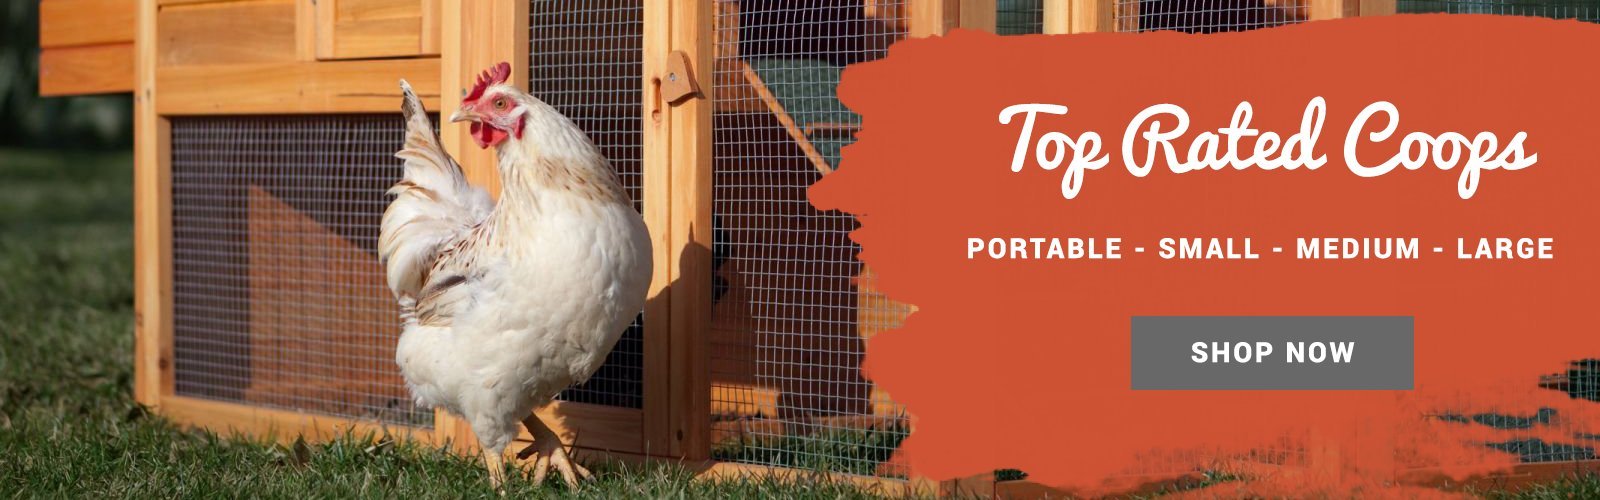 Top Rated Backyard Chicken Coops